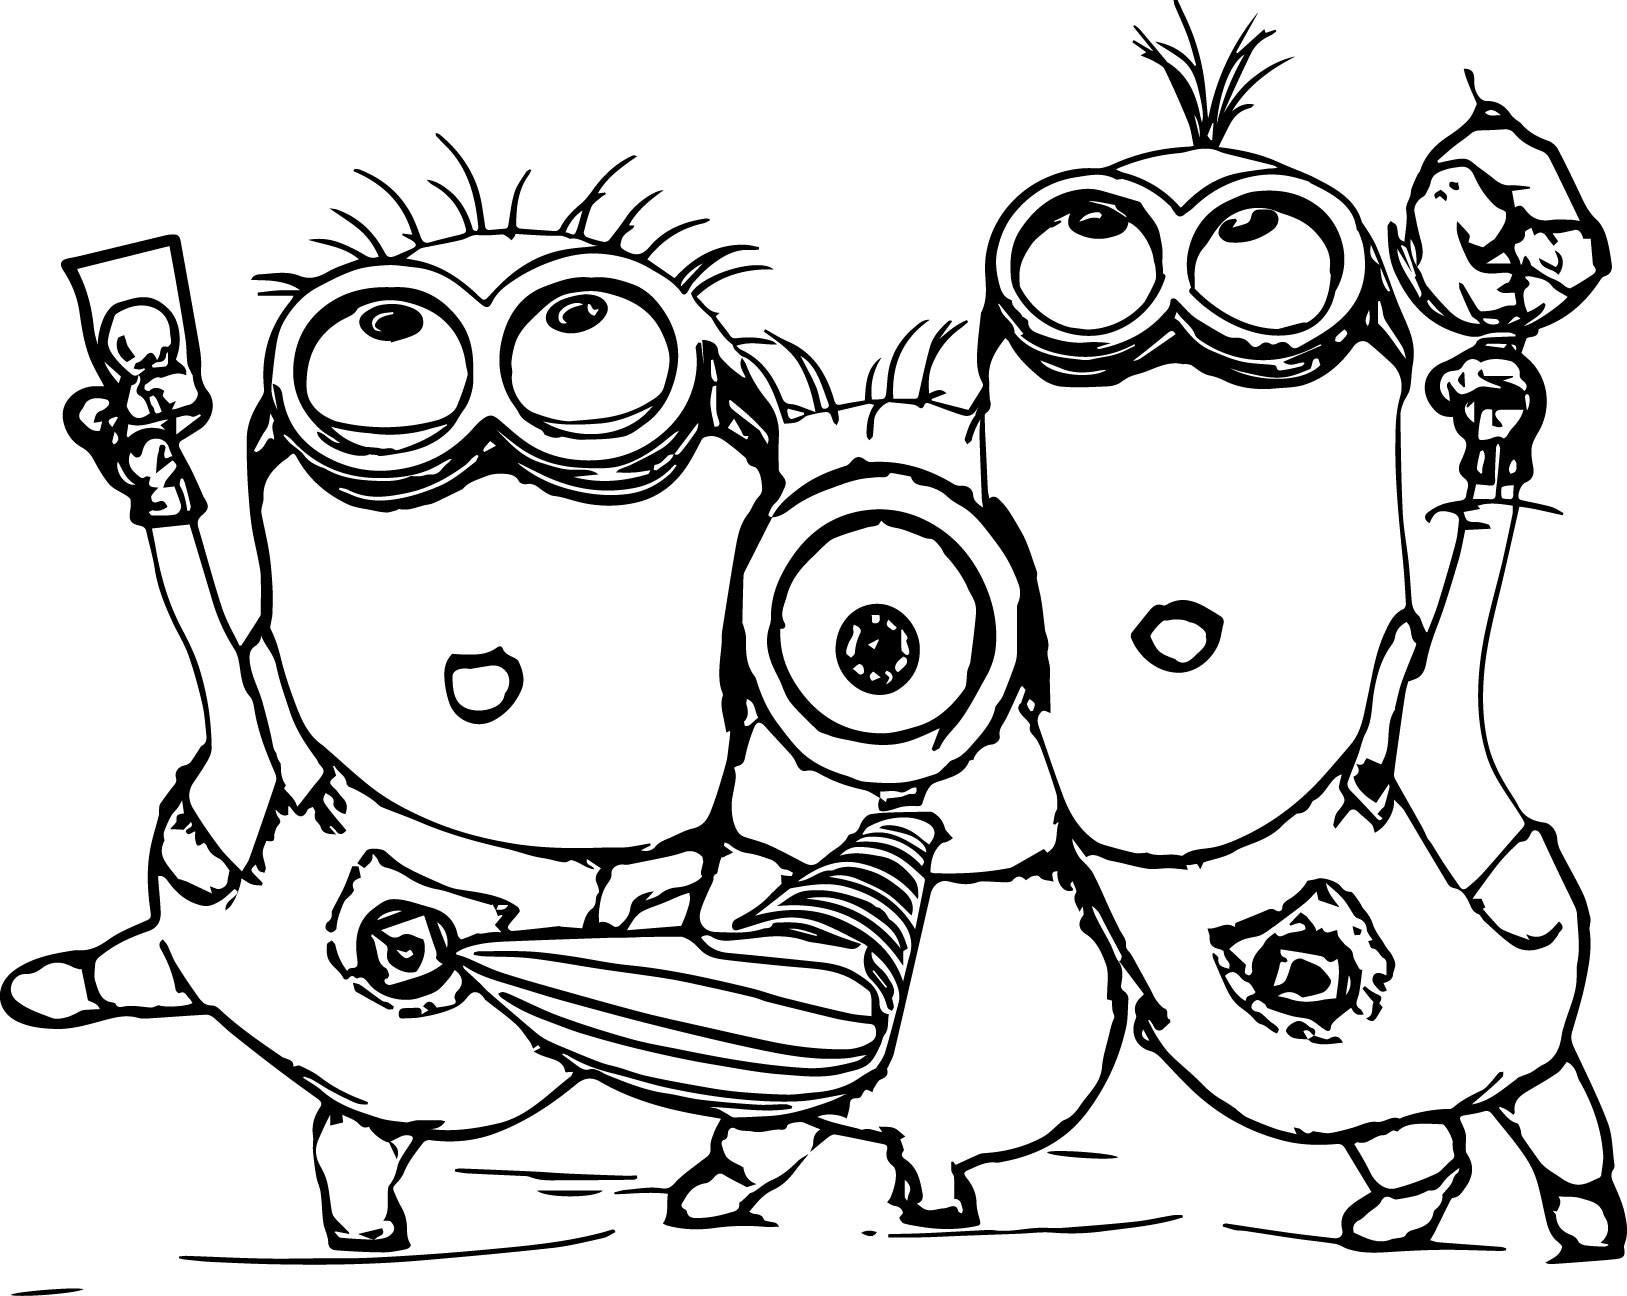 Minion Coloring Pages Pdf
 Minion Coloring Pages Best Coloring Pages For Kids